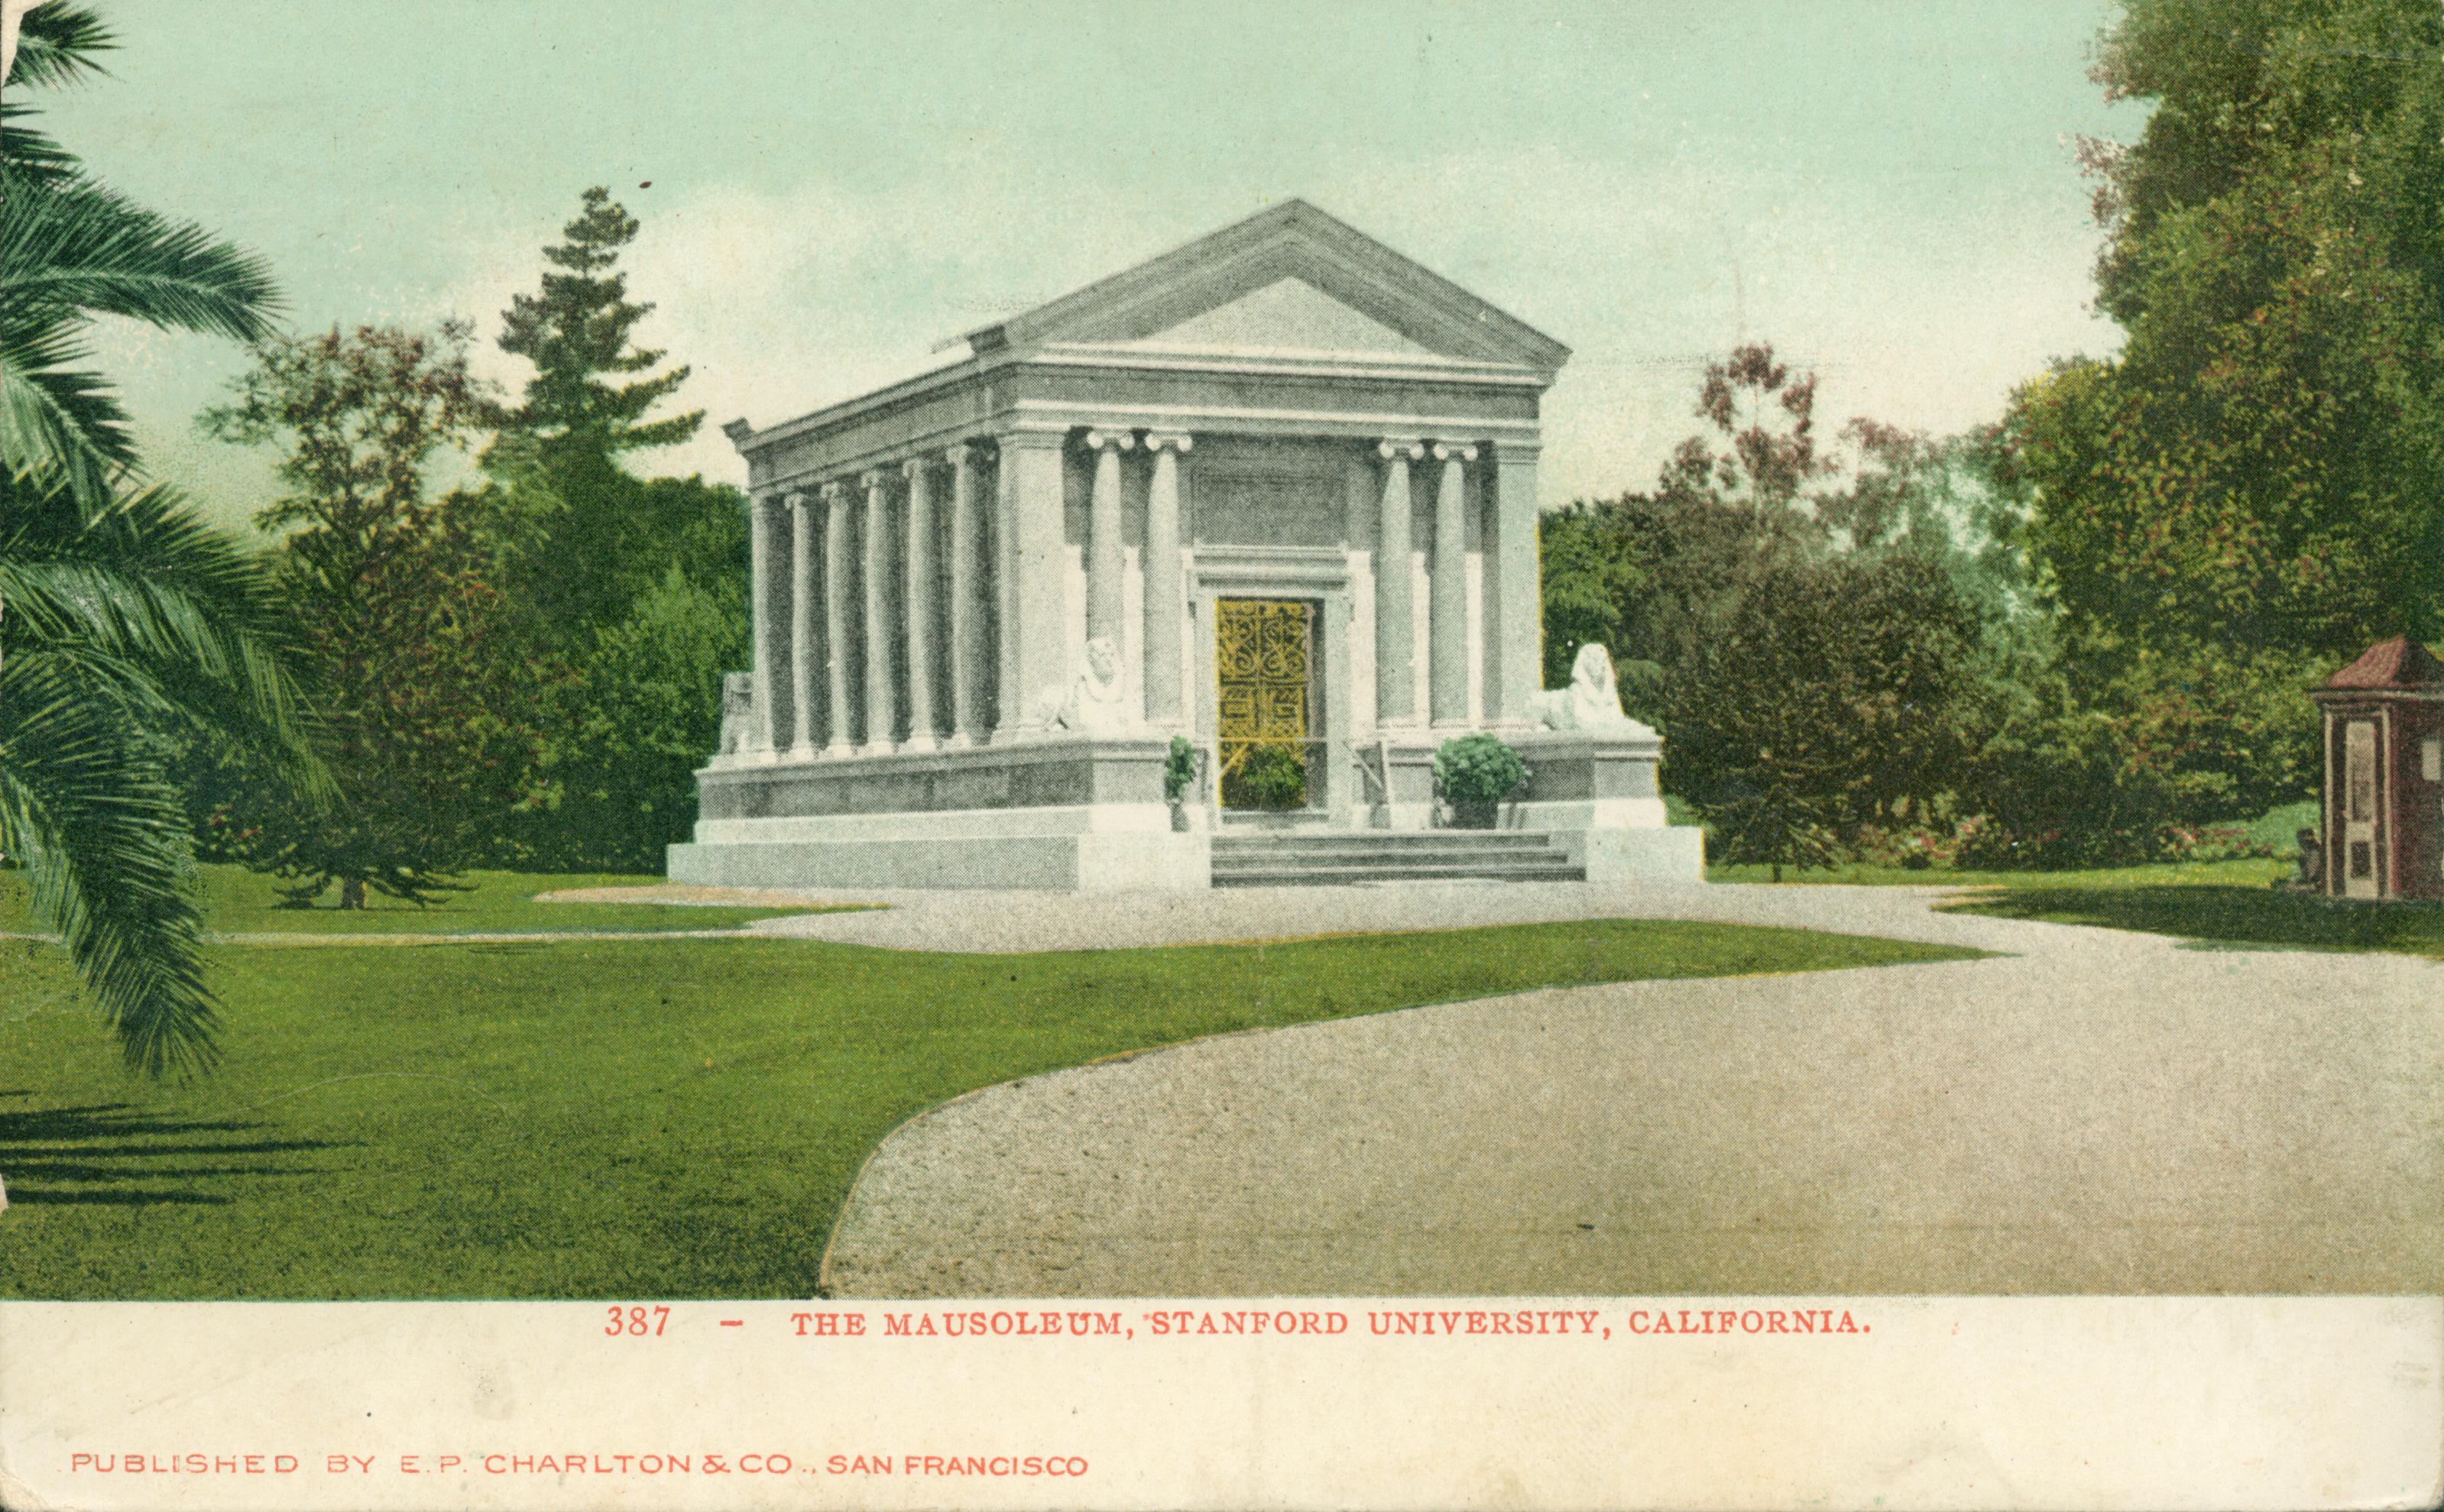 View of the large, white Mausoleum at Stanford University, surrounded by  lawn and trees